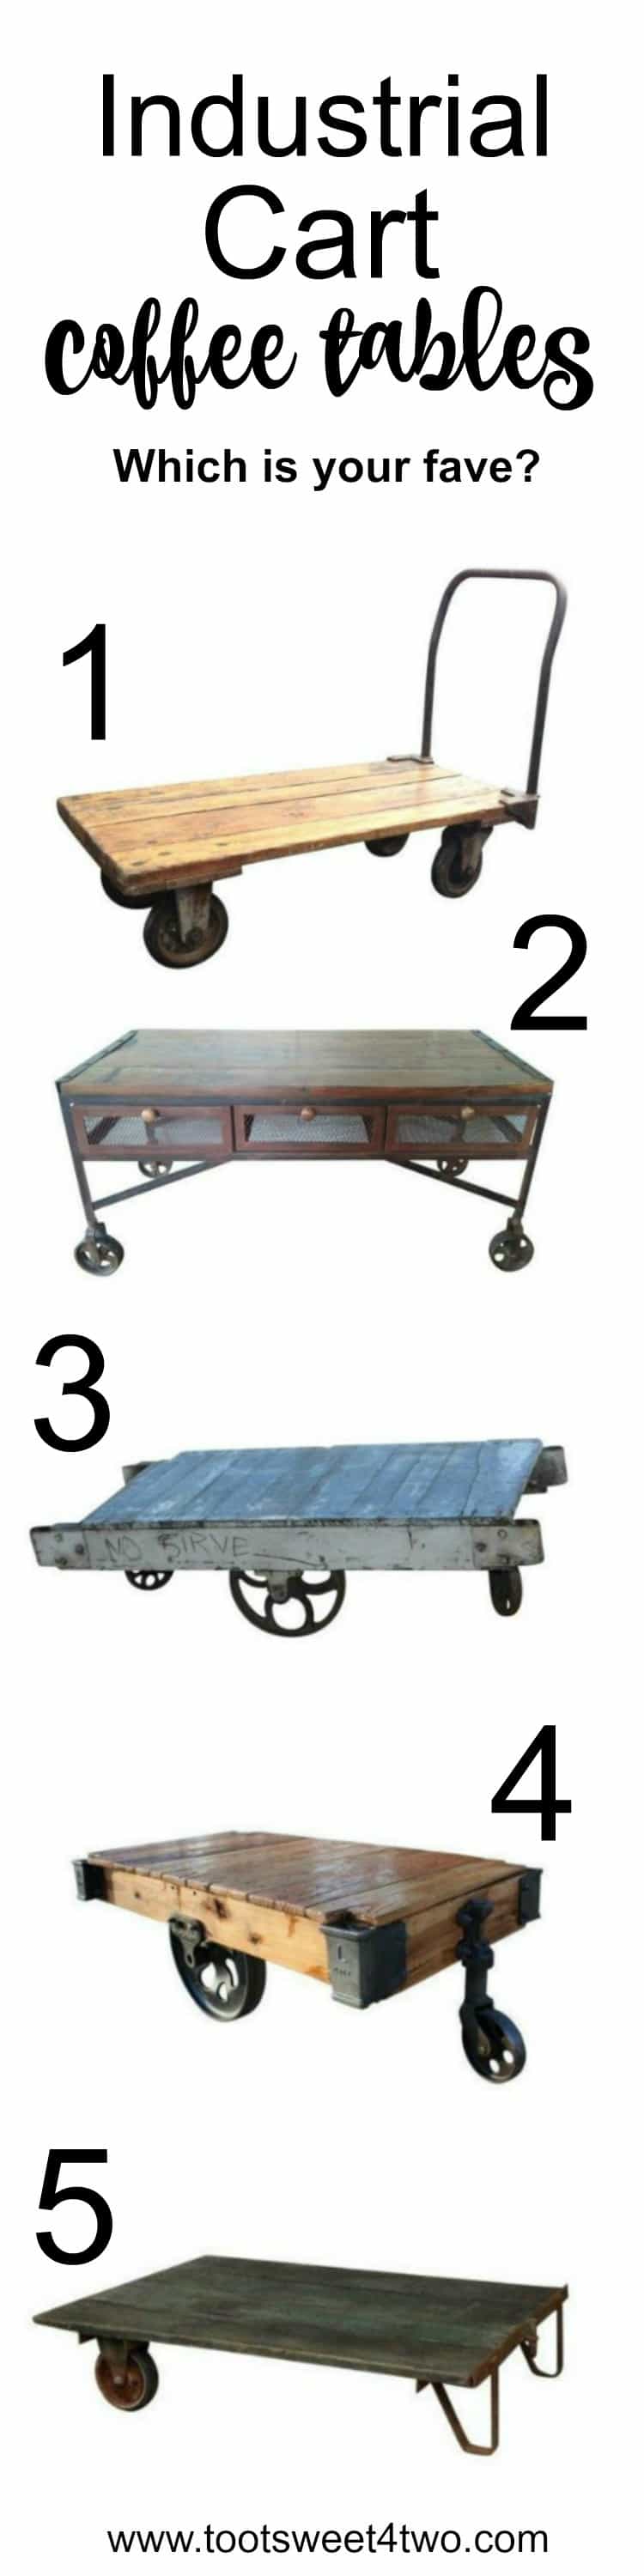 Are you searching for the perfect rustic coffee table? One with some age, a weathered masterpiece of coffee table perfection? Here are a few ideas for distressed, industrial, rustic, shabby chic and unique coffee tables. | www.tootsweet4two.com